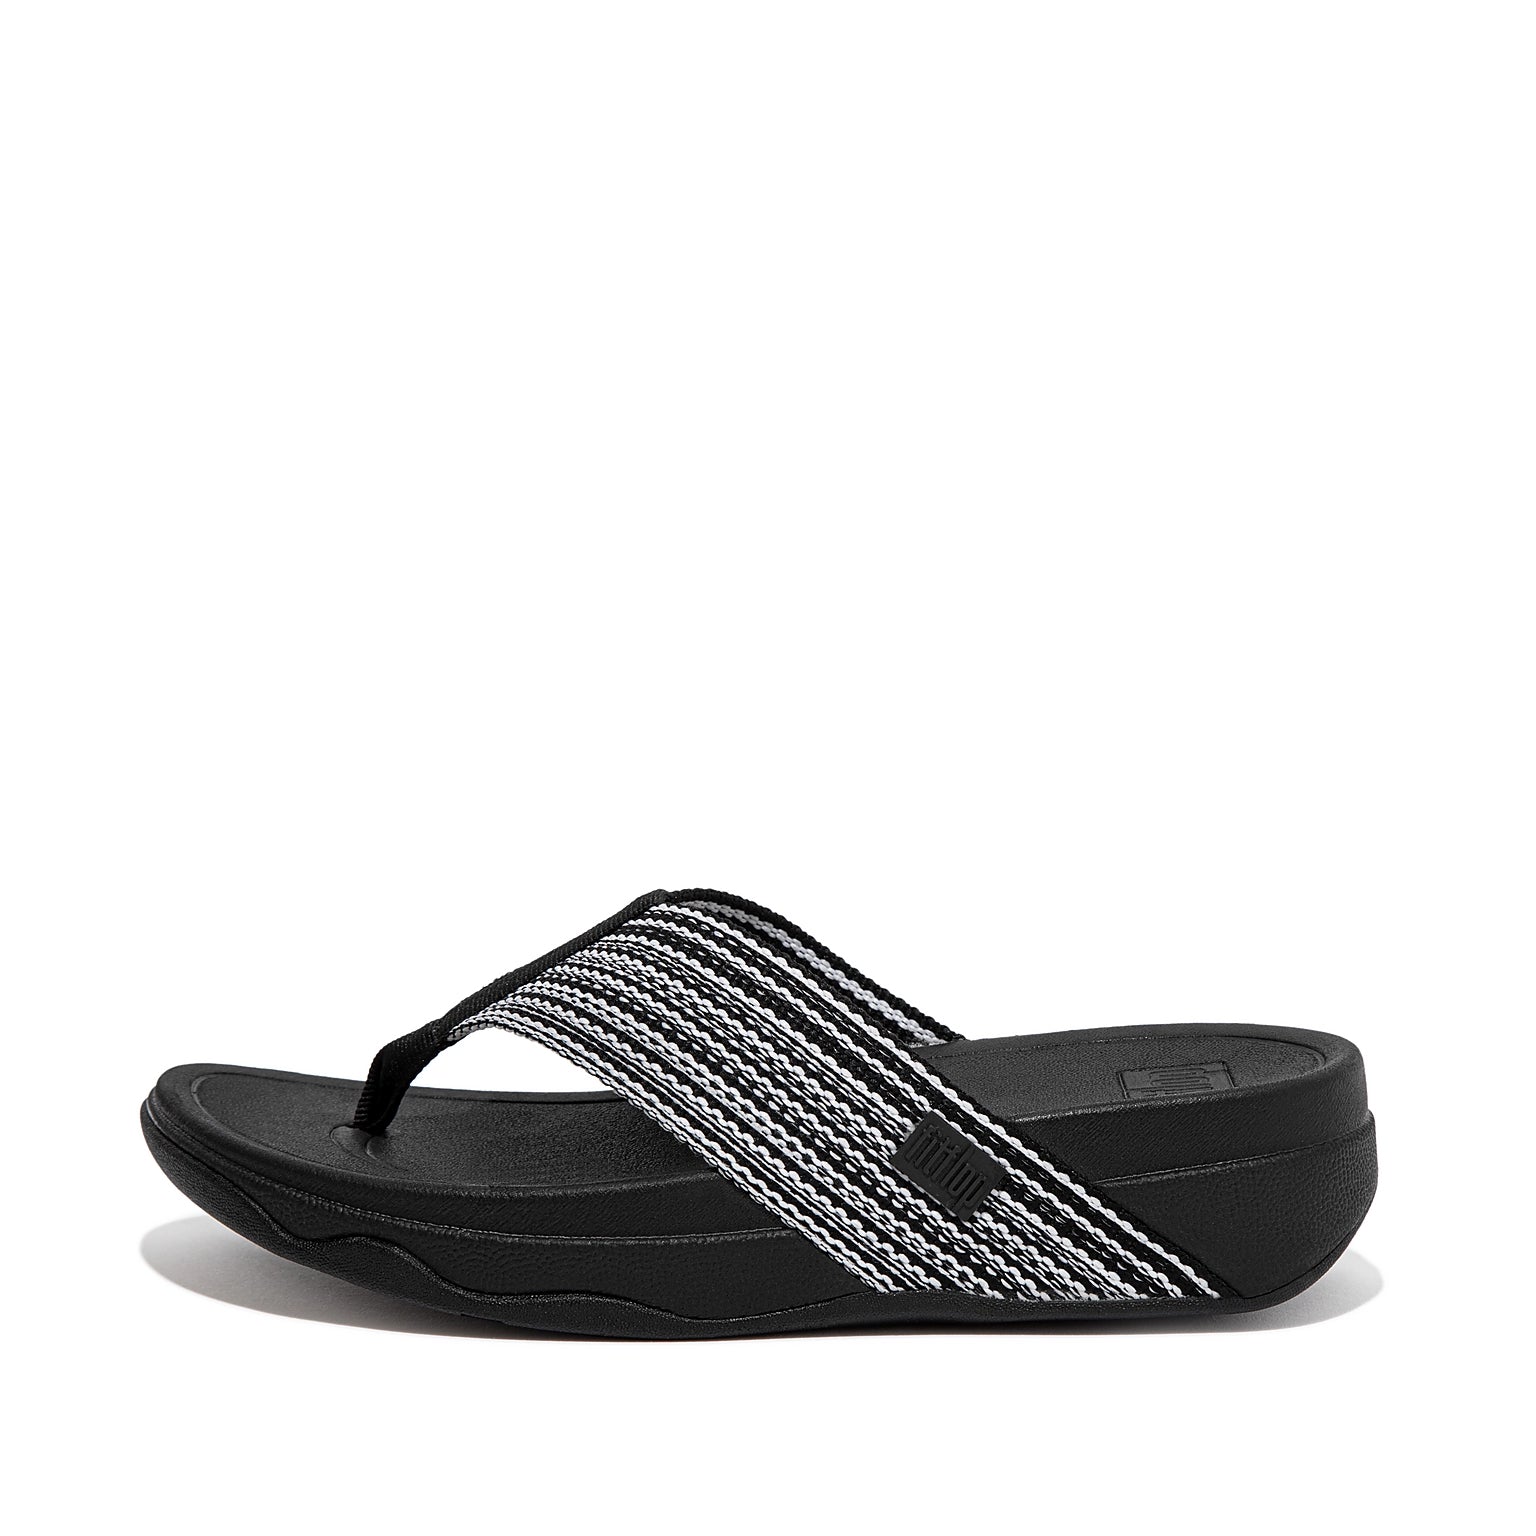 FITFLOP SURFA Toe-Post Sandals - Shoplifestyle